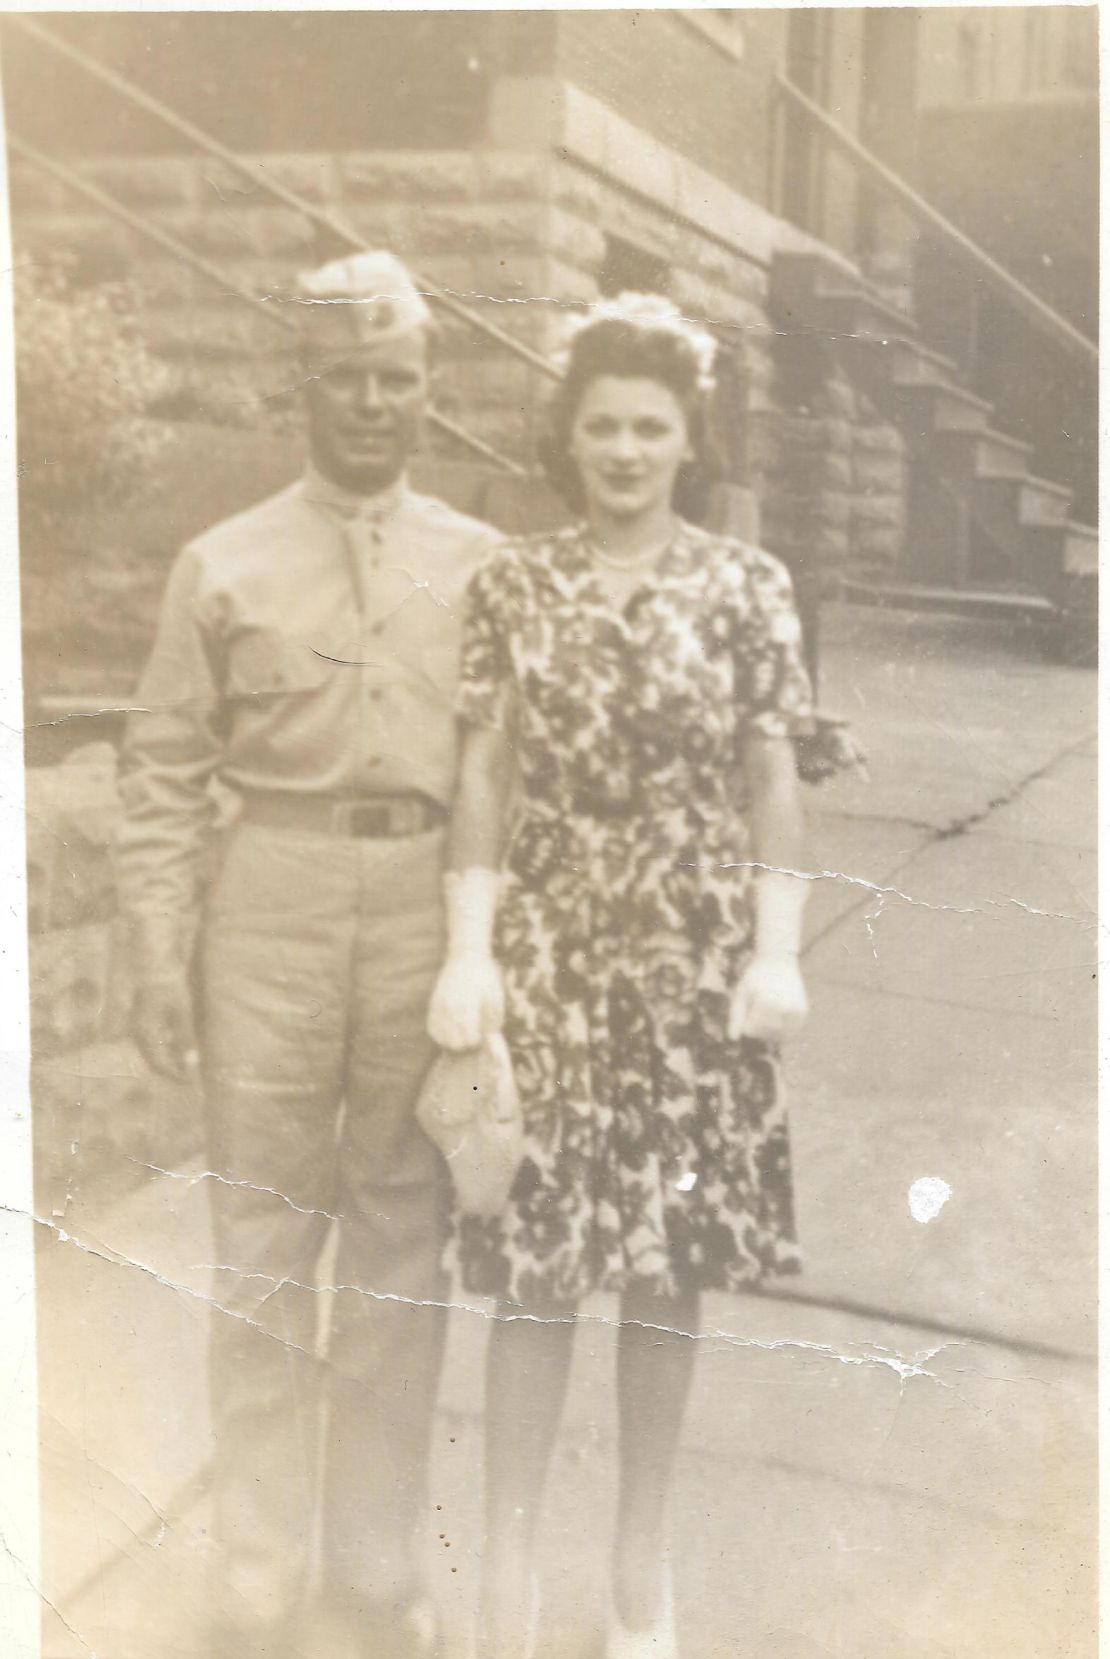 Lawrence "Larry" Bernard Merkamp in 1942 with his then-fiancee (later wife), Delta. 